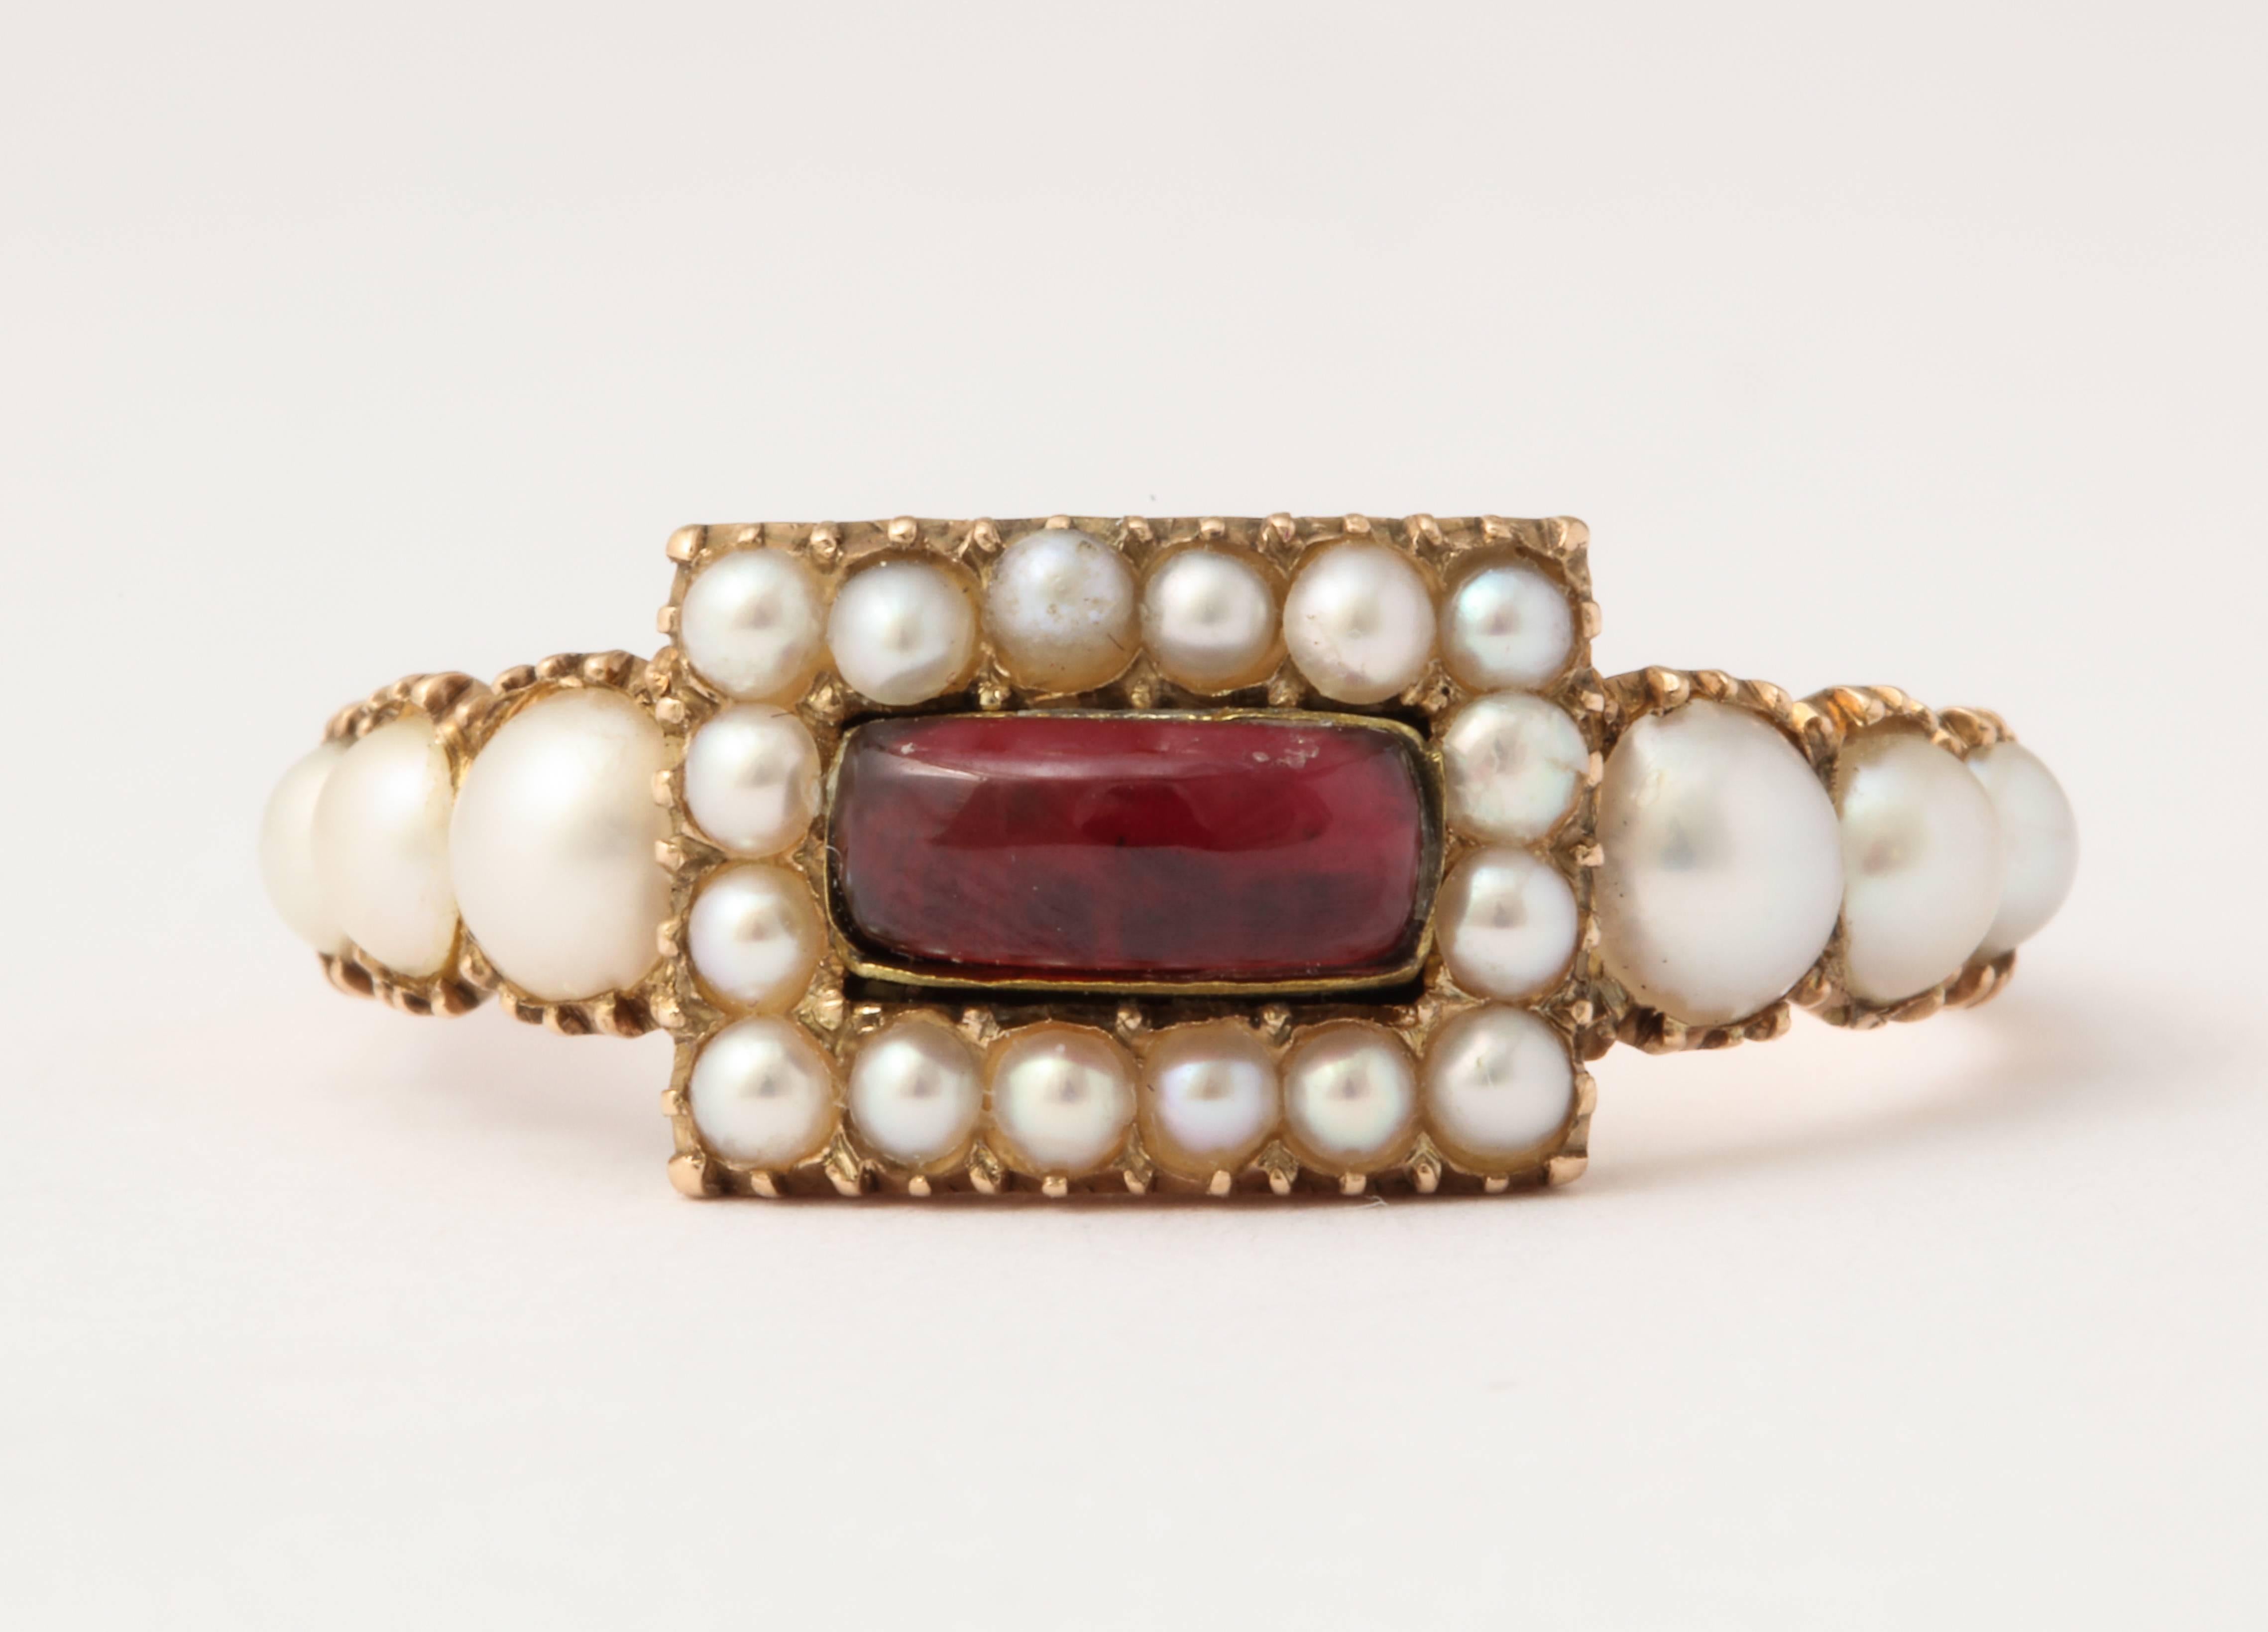 The gem quality is immediately visible in this treasure of a 15 kt gold natural pearl and garnet ring c. 1860. The pearls are lustrous and well matched as they frame the center garnet and spill graduated on the ring shoulders. Pearls were associated